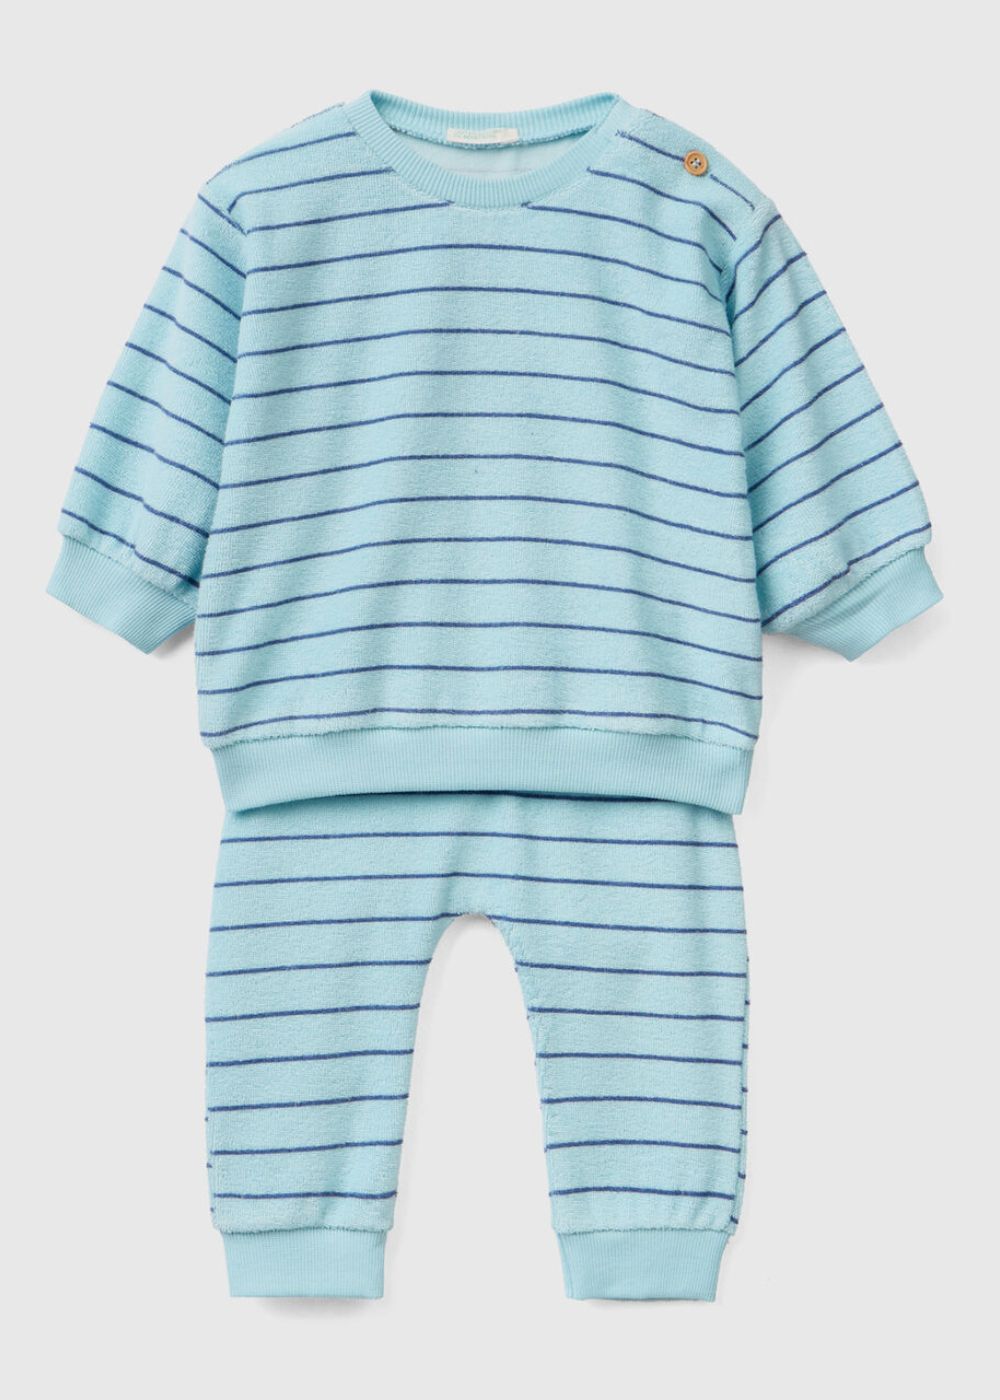 Baby Coordinated Outfit in Terry - Benetton Kids Clothing - Good's – Goods